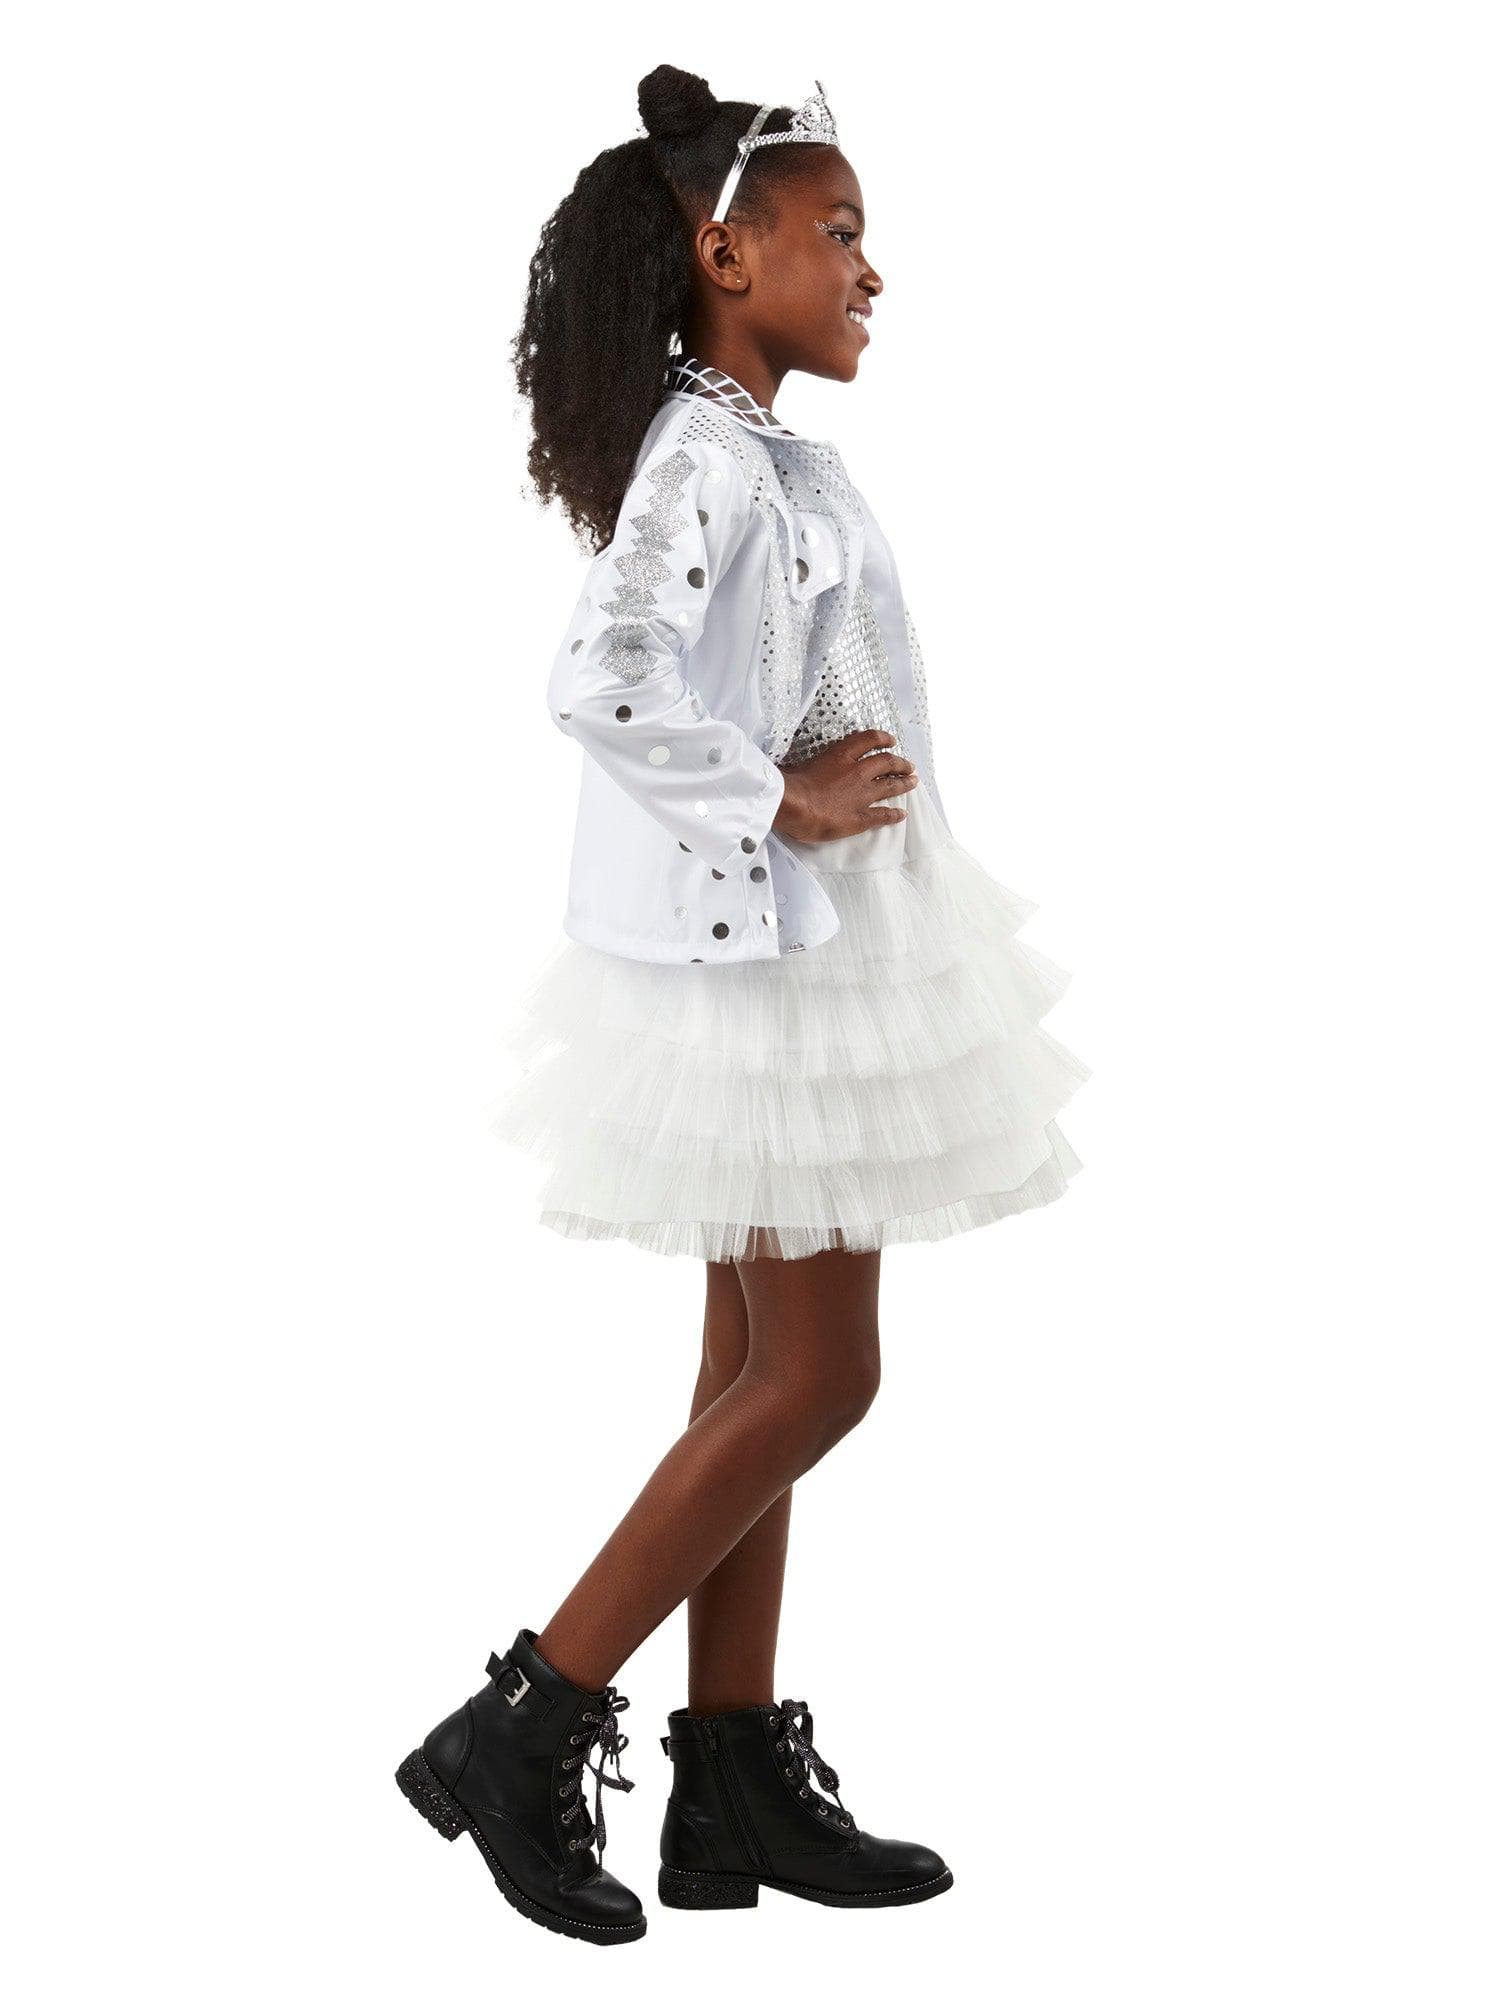 That Girl Lay Lay Kids Costume - costumes.com